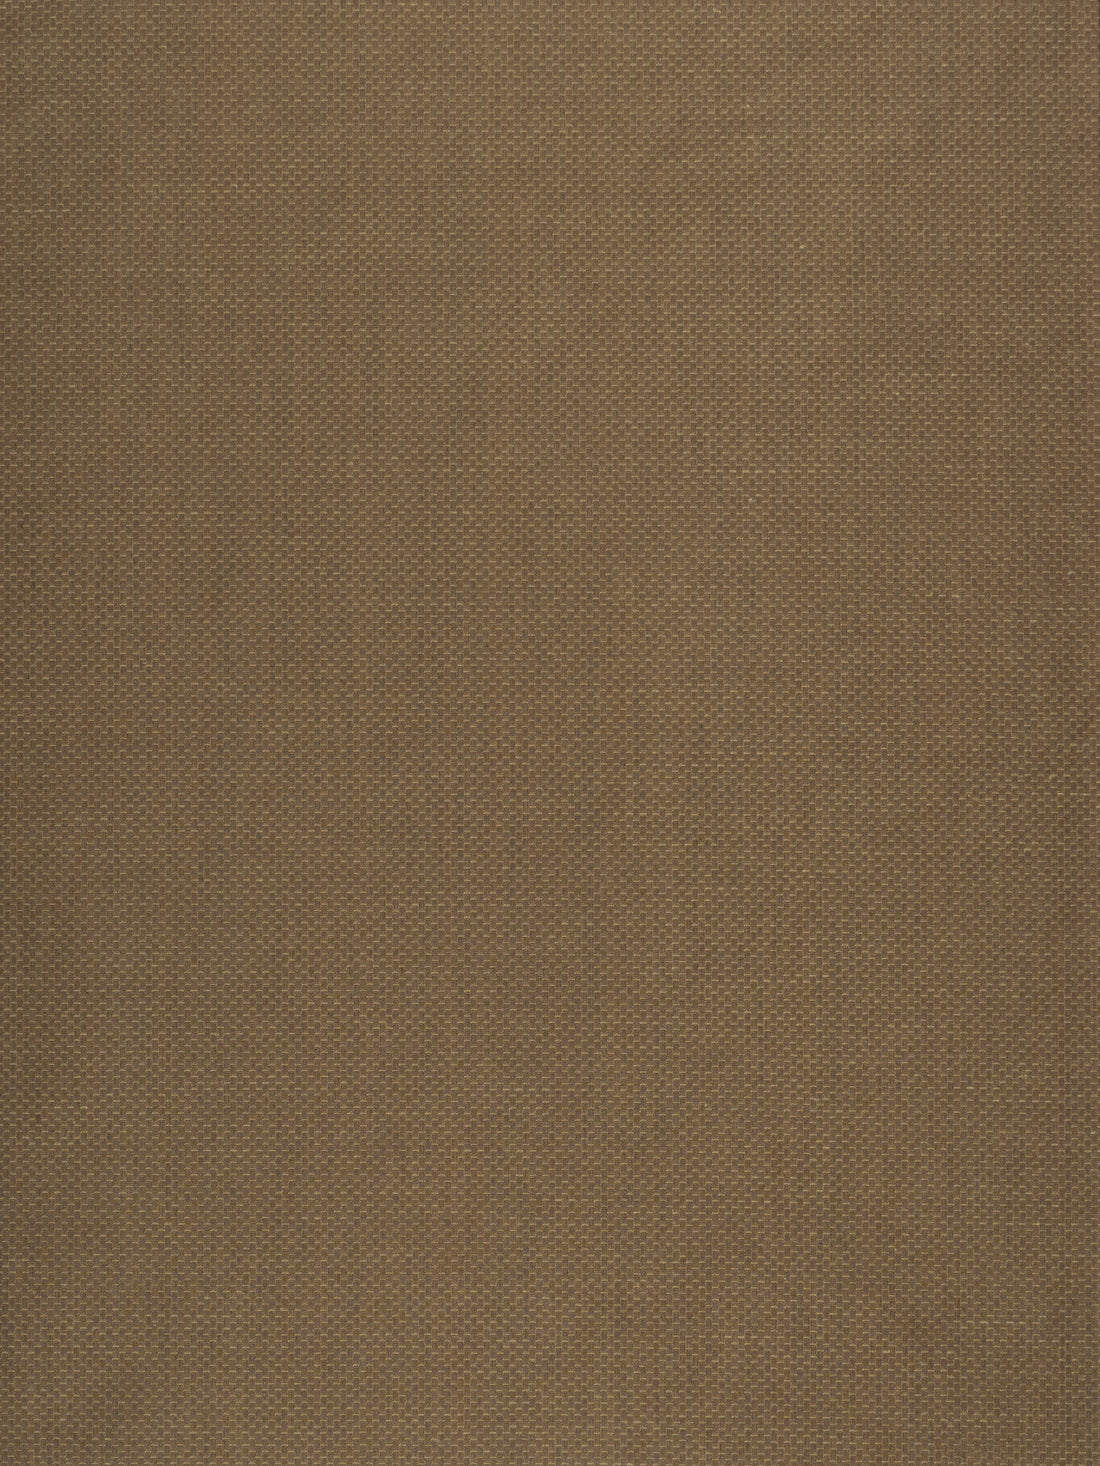 Syncopated Strie fabric in brown color - pattern number M0 00031539 - by Scalamandre in the Old World Weavers collection